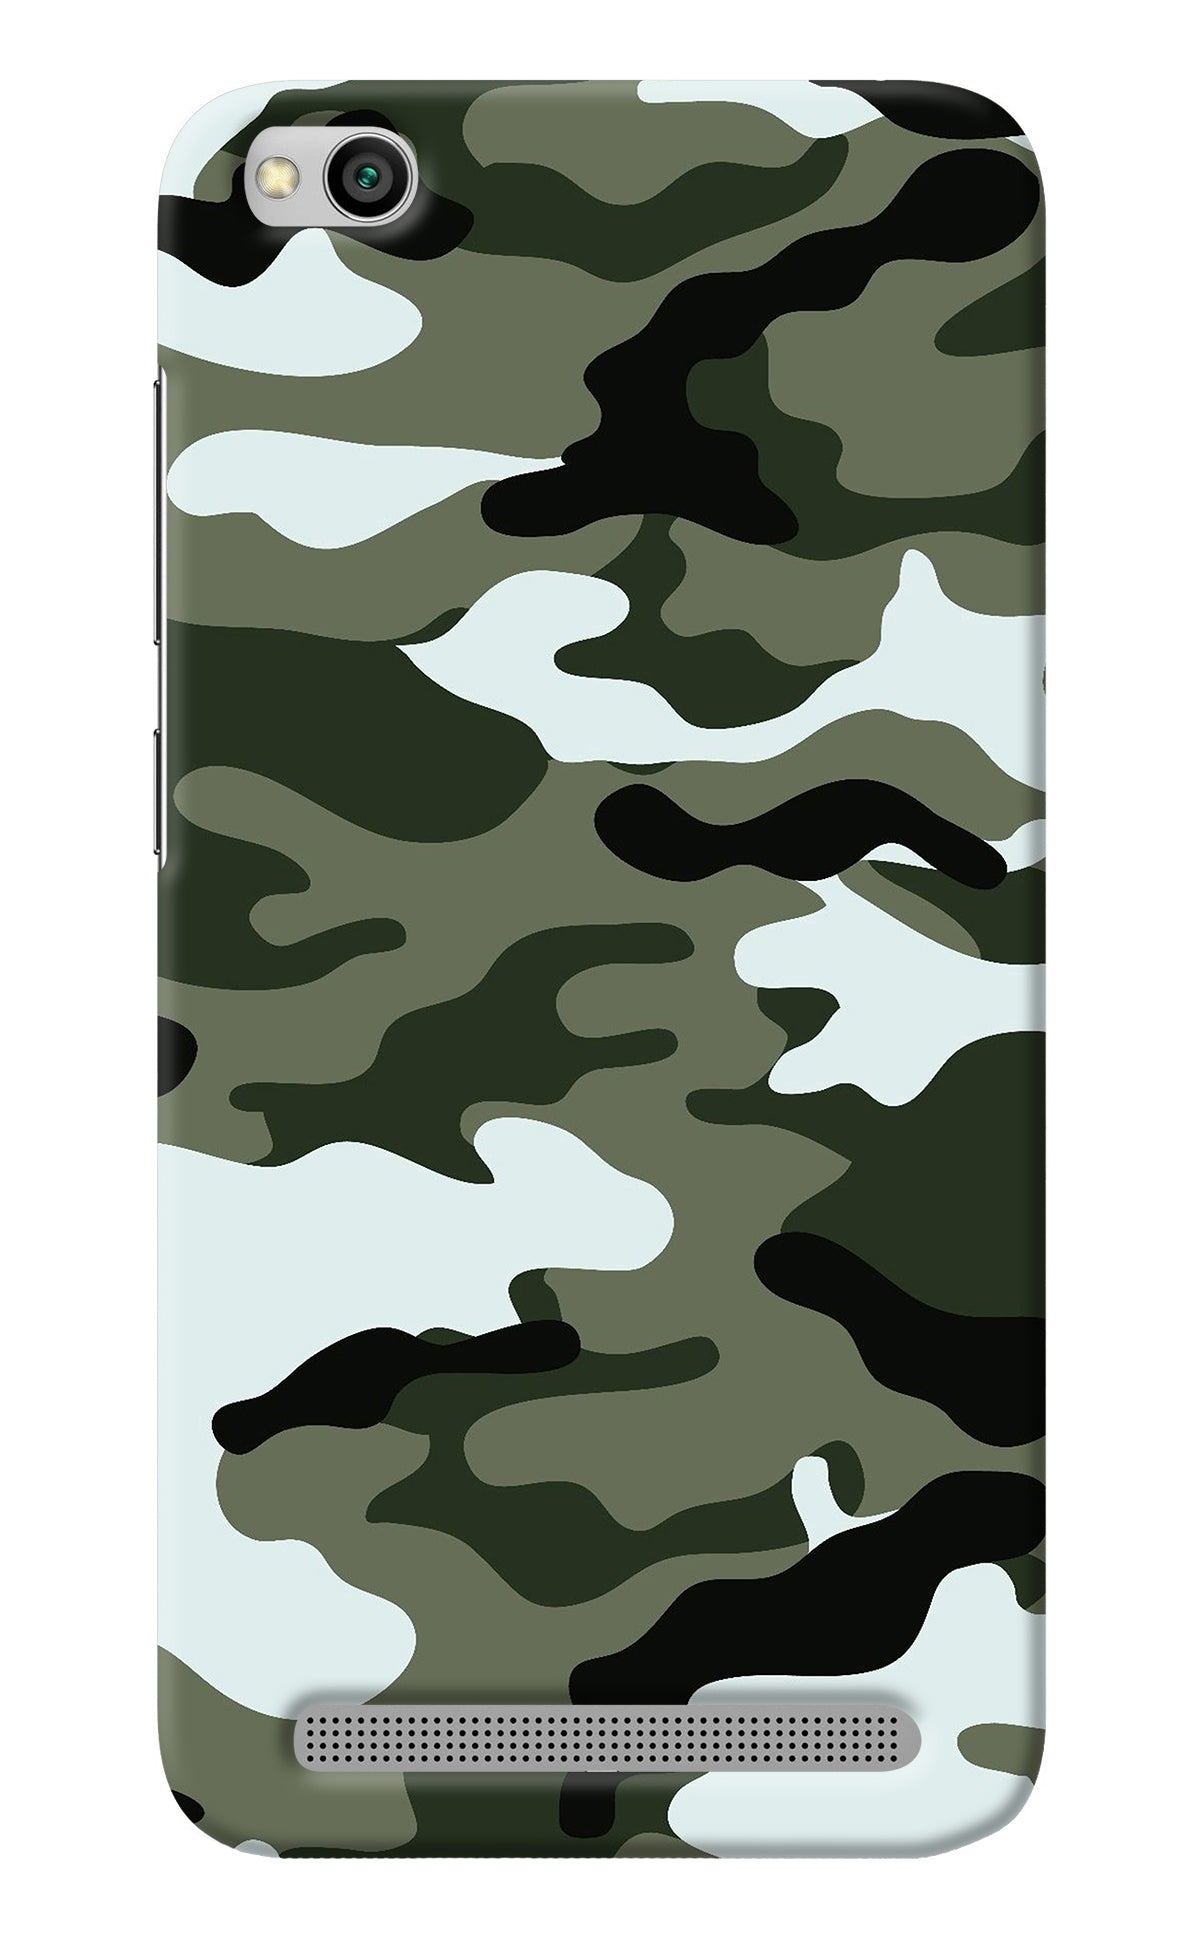 Camouflage Redmi 5A Back Cover